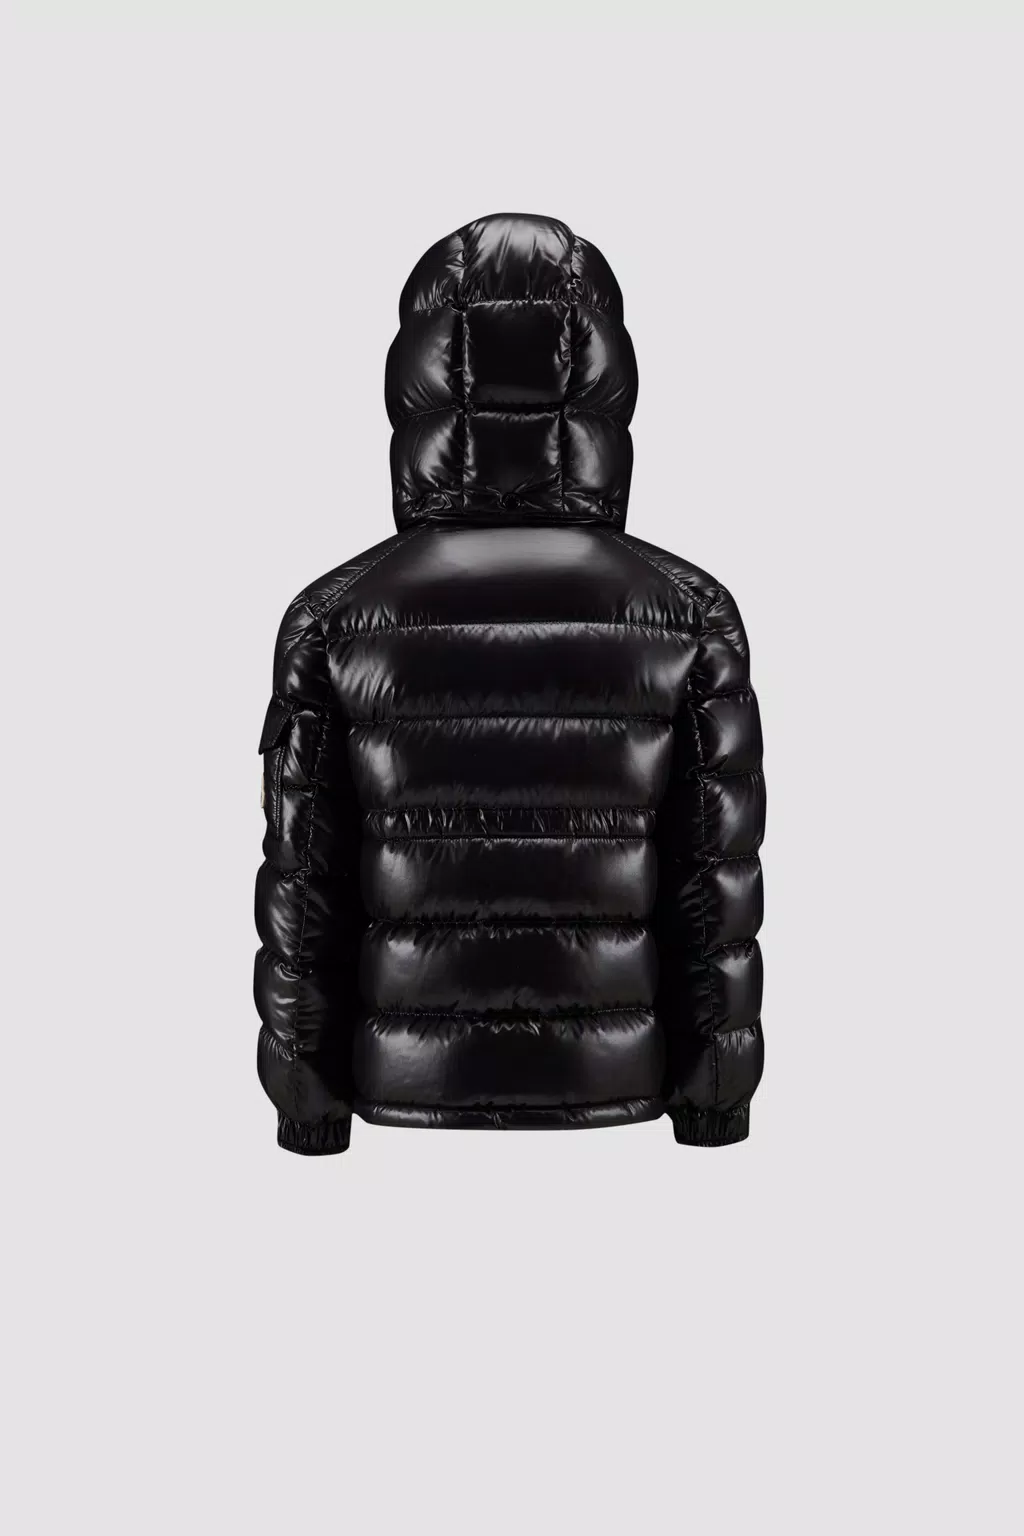 Girls' Clothing - Jackets, Dresses, Hoodies & Shoes | Moncler US